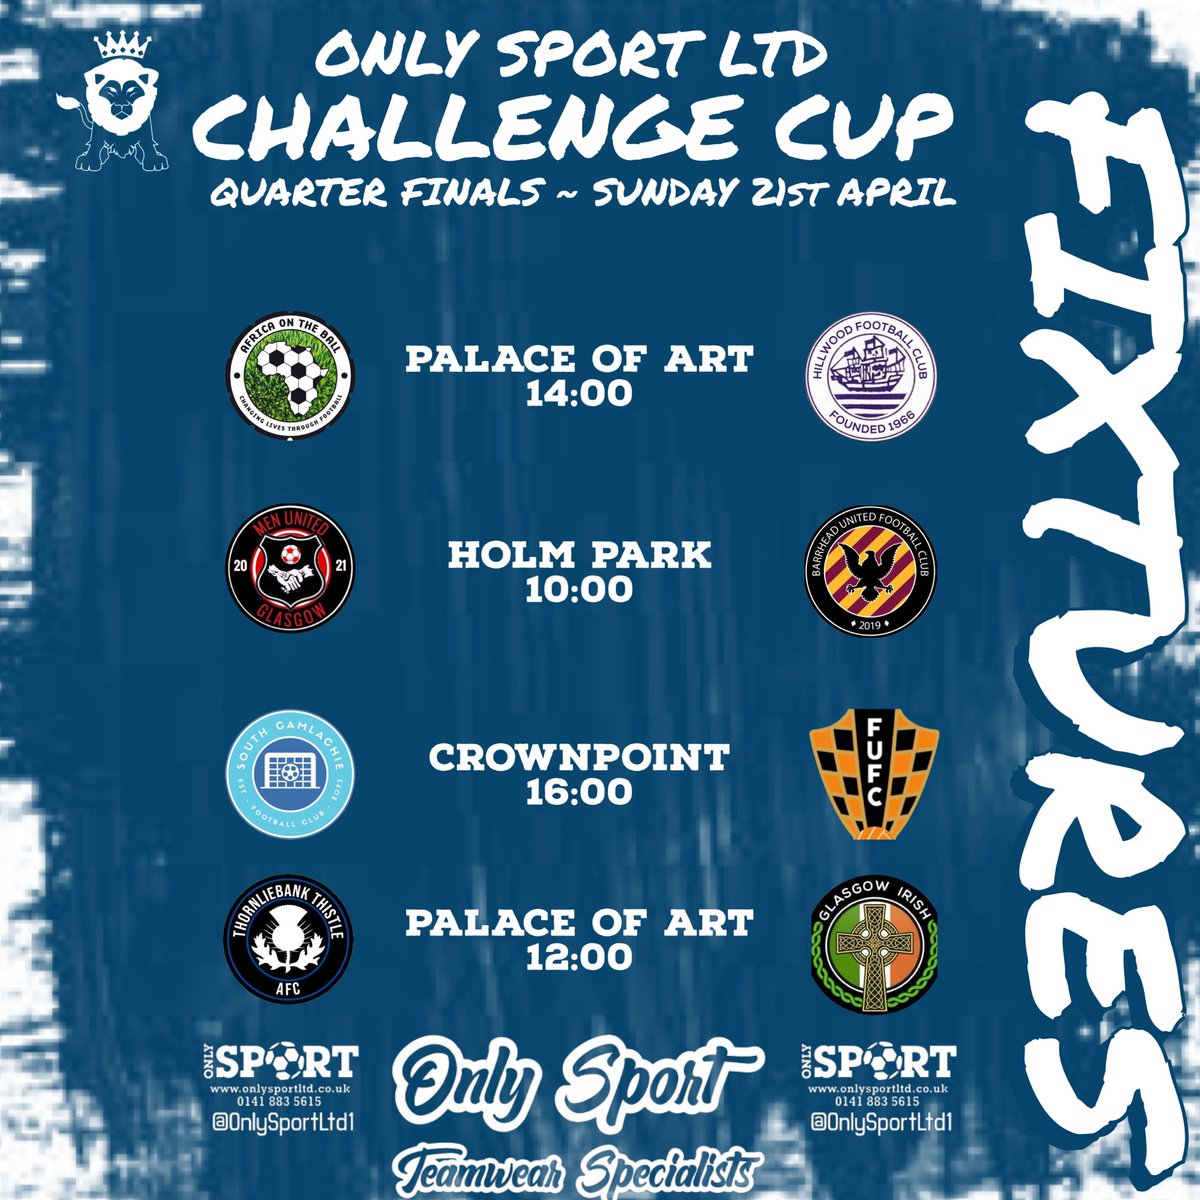 Tomorrow we have the QFs of @OnlySportLTD1 Champions & Challenge Cup…. Some great ties in store 👍⚽️ @ScotAmFA @scottish_aff @refsix @ftsc0res @SnJsFootyFocus